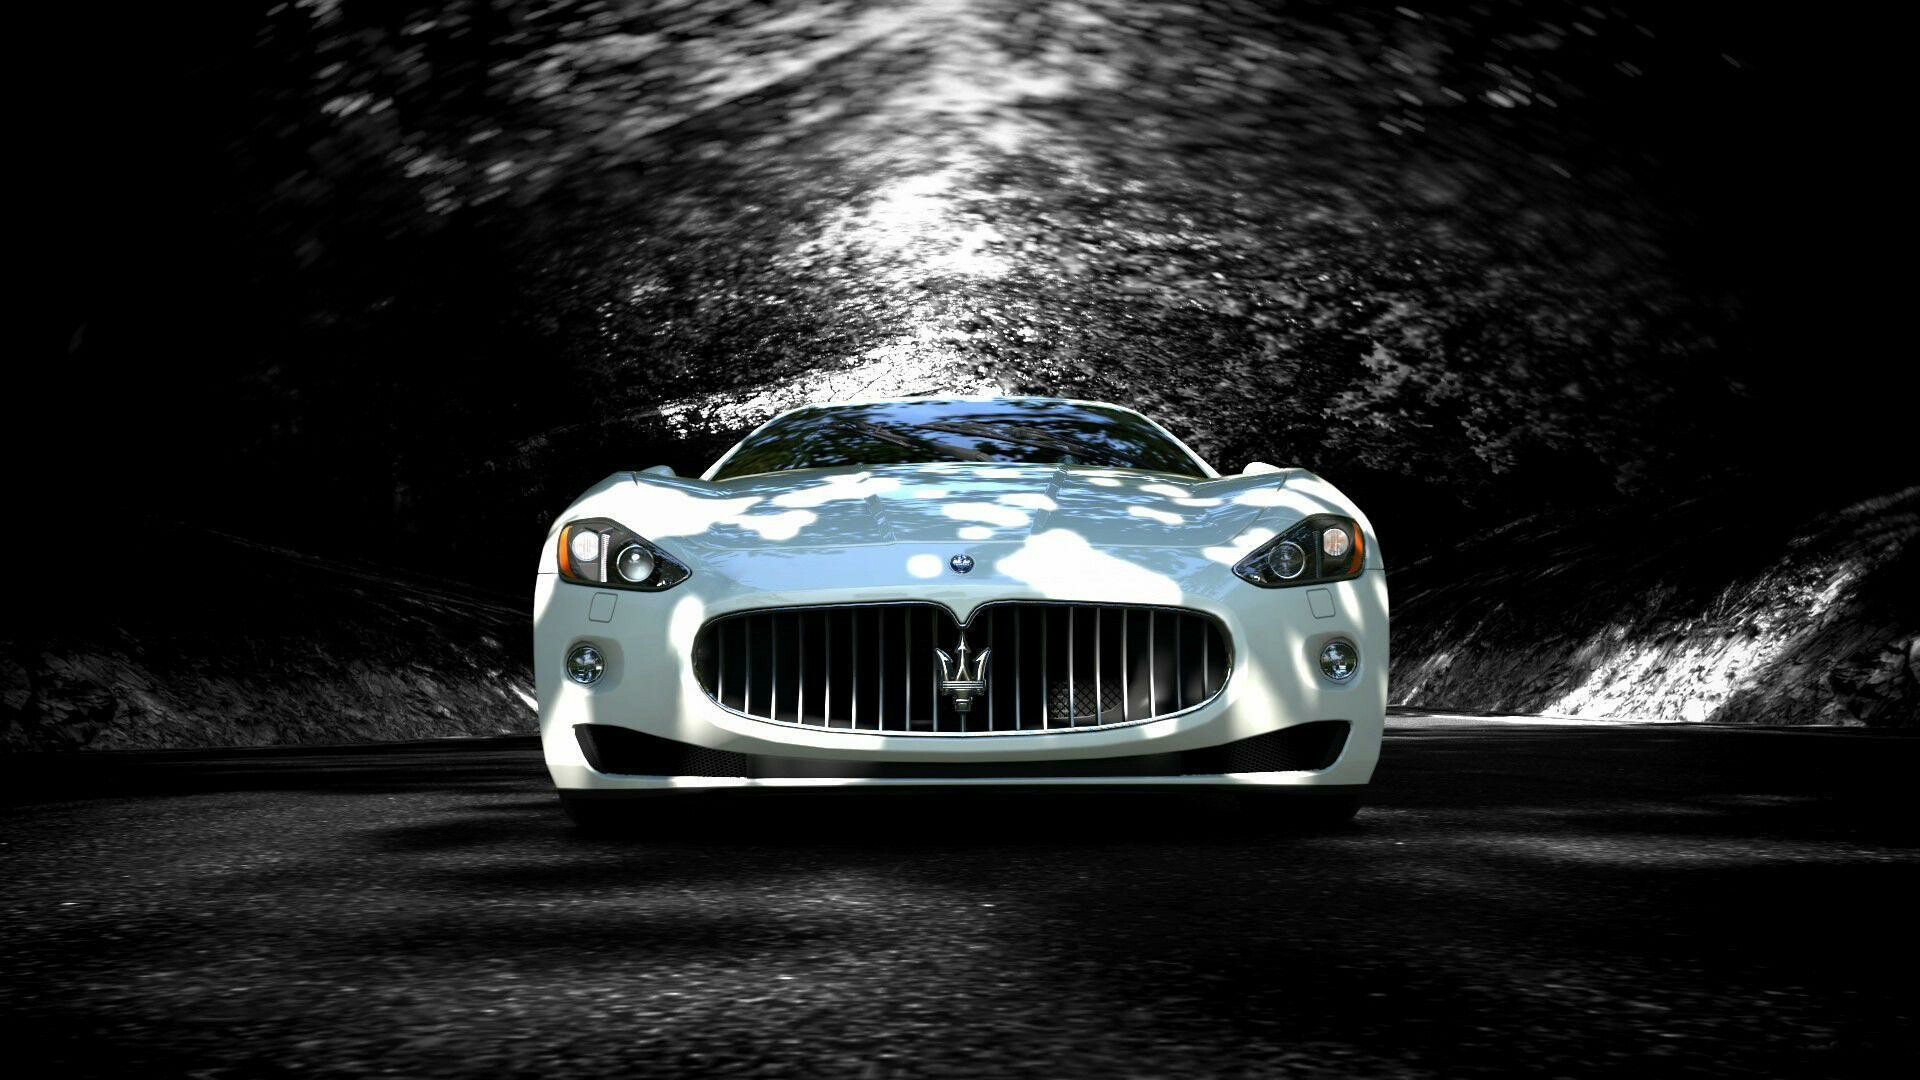 Maserati: The new GranTurismo uses the Nettuno V6 engine the automaker introduced with the MC20. 1920x1080 Full HD Wallpaper.